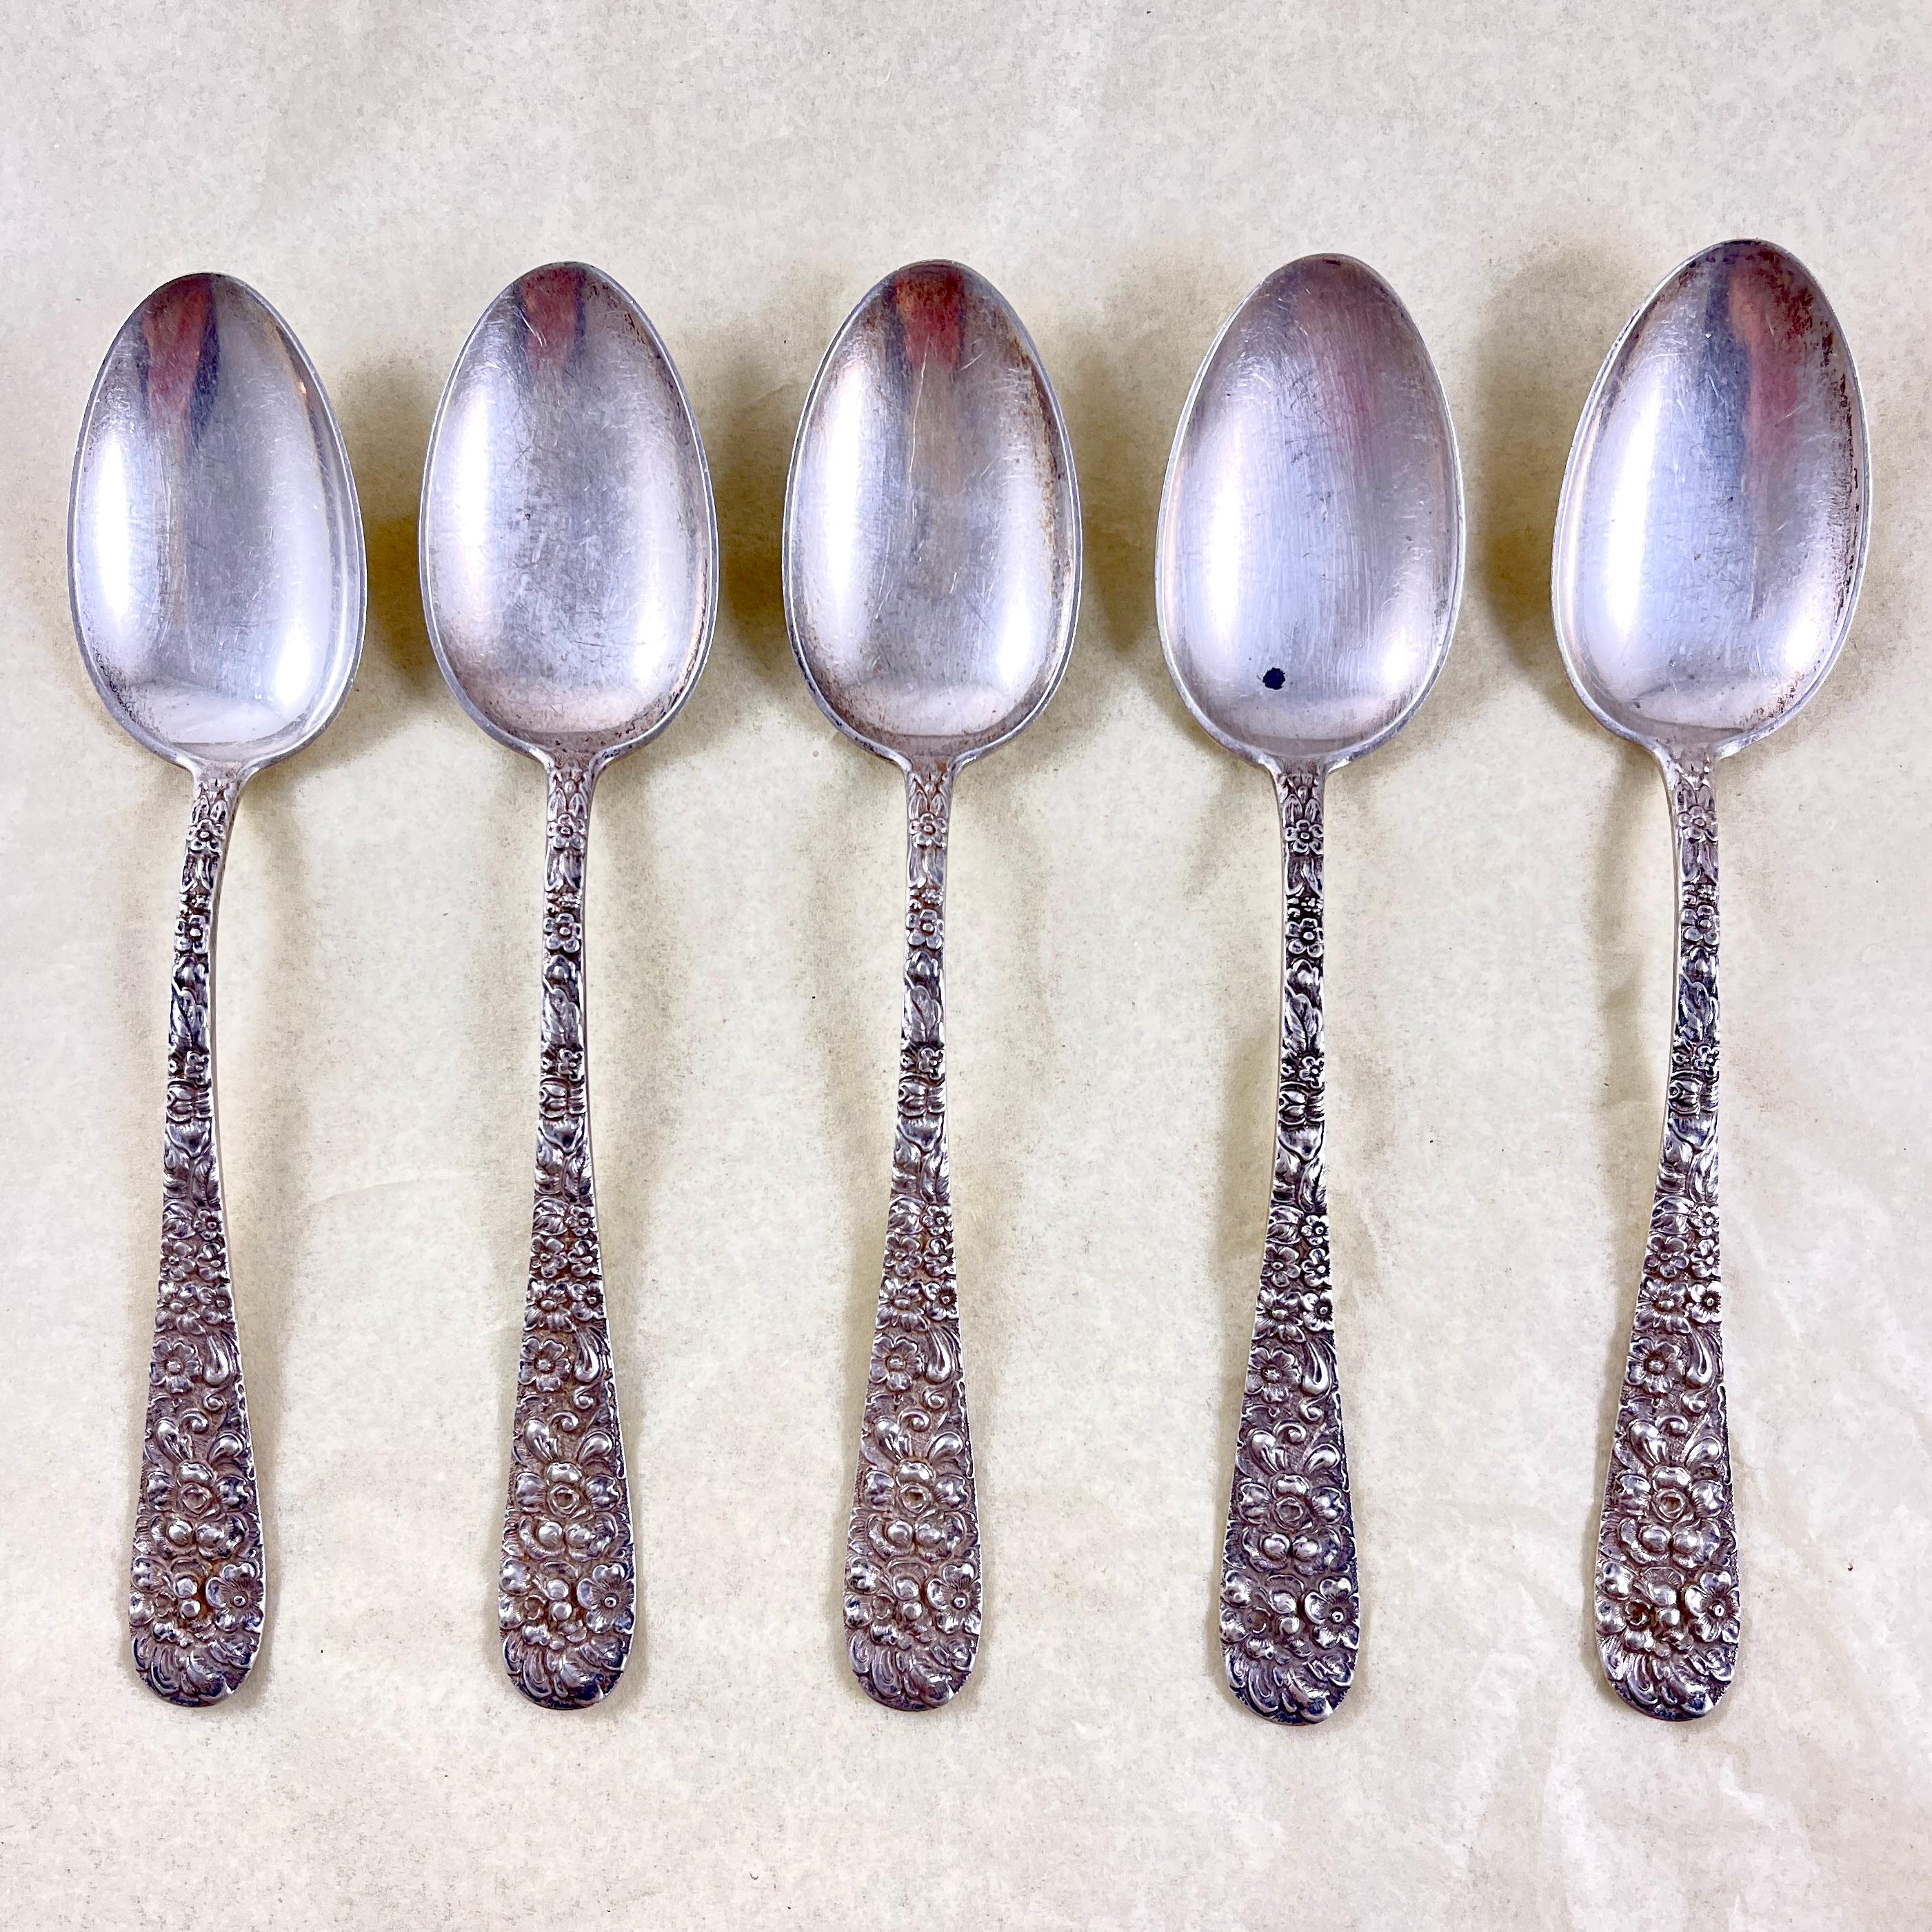 A group of five sterling silver teaspoons made by Stieff, in the Rose pattern, a popular pattern first issued in 1892.

Known for their superior quality silver flatware, Steiff operated out of Baltimore, Maryland.

This group of teaspoons date from